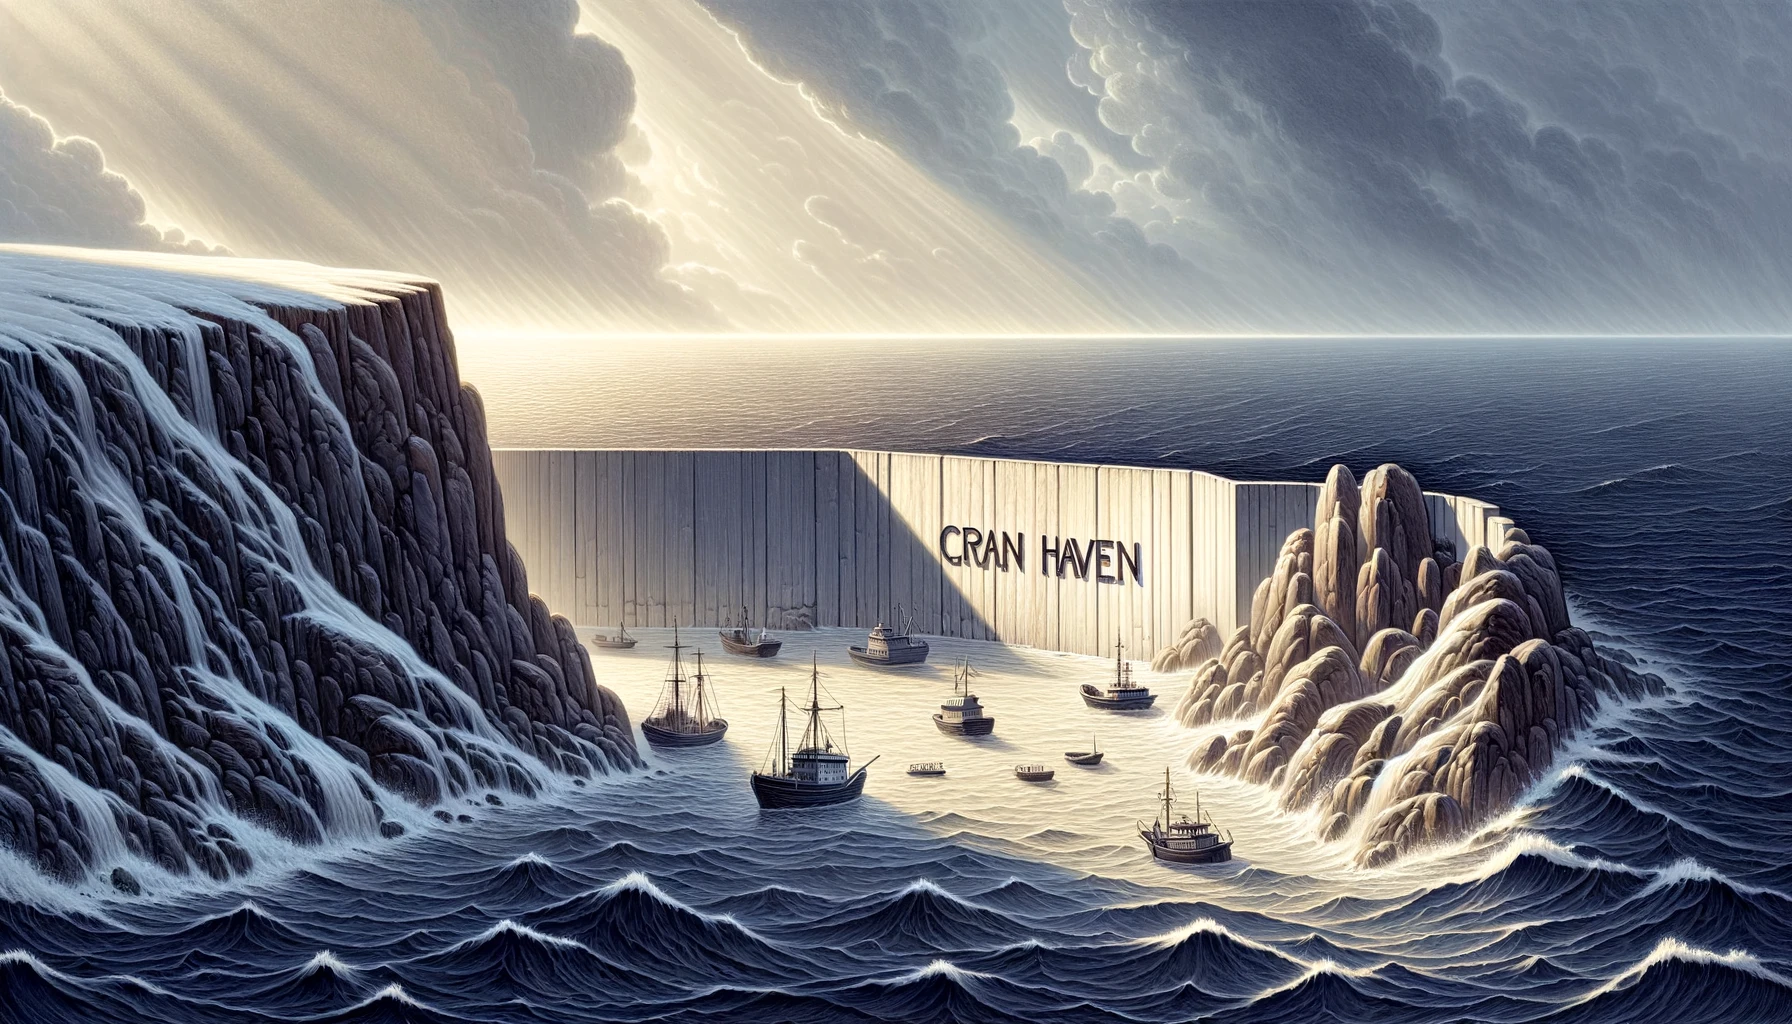 Image depicting a dramatic and stylized seascape. There is a large, cliff-like formation on the left with water cascading down its side, simulating a waterfall. On the right, a massive, vertical wall with the words 'CRAN HAVEN' written on it creates a stark contrast with the natural features. The wall appears to be constructed out of container-like structures, suggesting a man-made barrier or perhaps an installation by the sea. In the water, several ships are visible at varying distances from the viewer, likely representing different types of fishing or sailing vessels. They add a sense of scale and activity to the scene. Above, the sky is filled with textured clouds, and sunbeams break through them, casting a warm light on the ocean and parts of the cliffs, which creates a visually striking effect. The overall atmosphere is one of a surreal blend between the natural world and human influence, possibly implying a safe harbor or refuge symbolized by the words on the wall. The art style is reminiscent of a digital painting, with a high level of detail and a dramatic interplay of light and shadow.